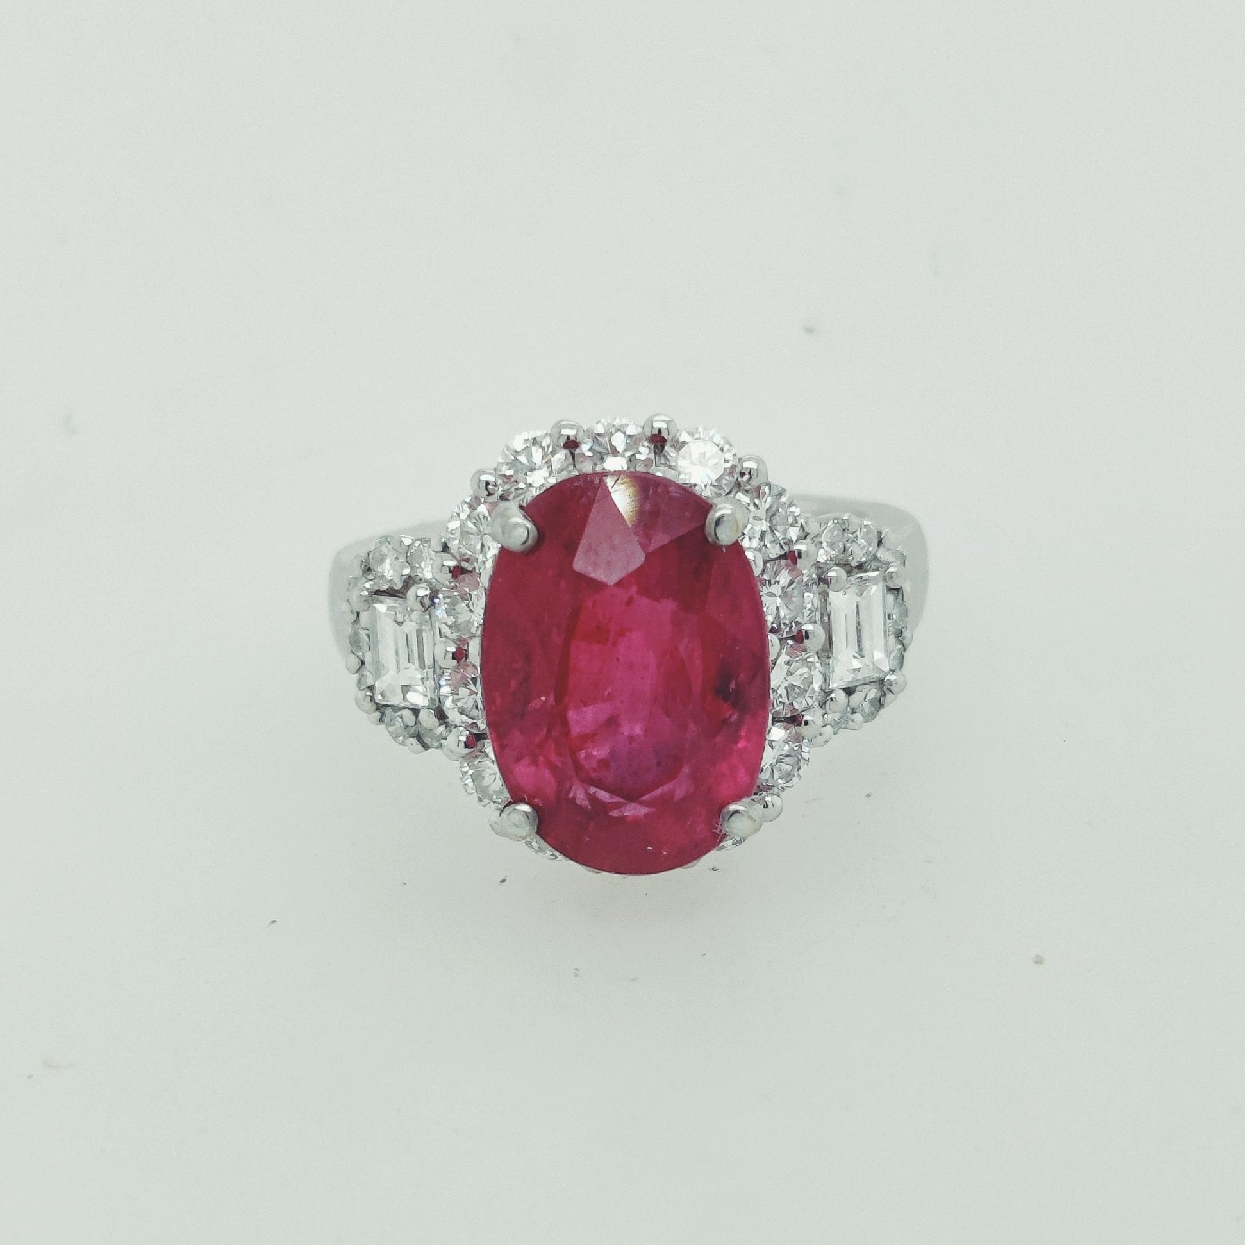 18K White Gold Ruby Ring with Diamond Halo; Size 6.5
6.21CT Ruby 
Diamonds are Approximately 1.18CTTW; VS color/F Clarity